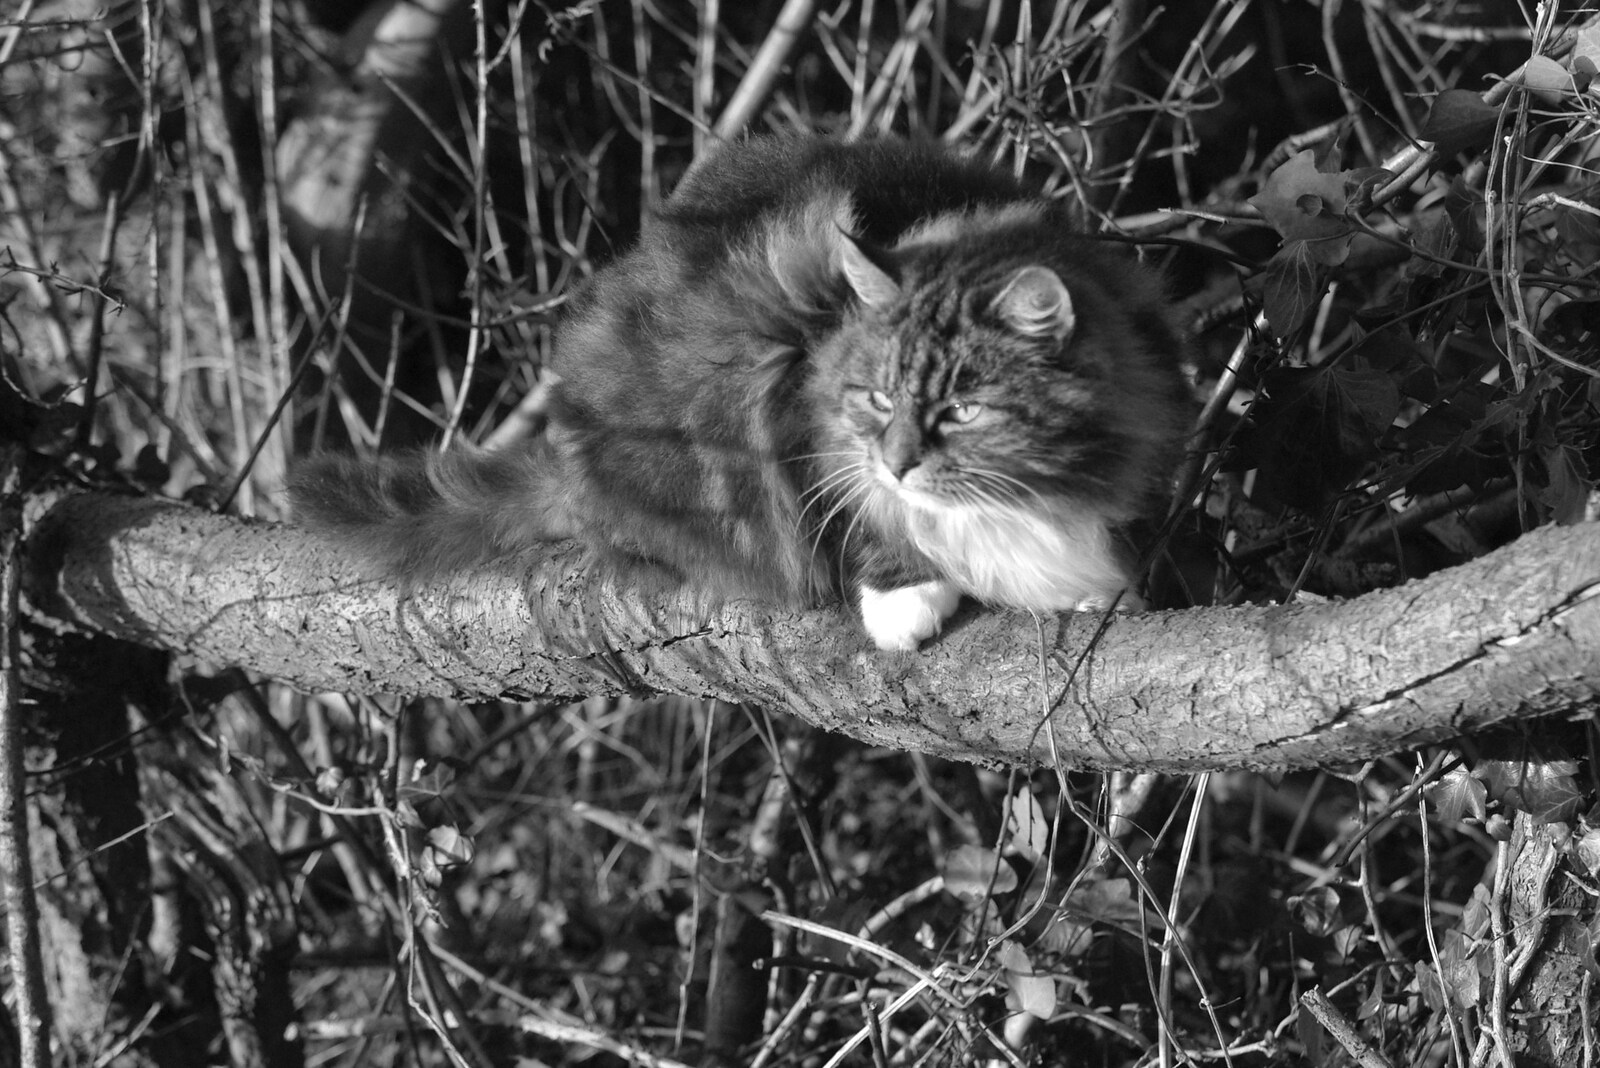 Sophie in a tree, in the late-afternoon light from Post-modern Alienation: Bleak House, a Diss Miscellany, Norfolk - 3rd December 2005